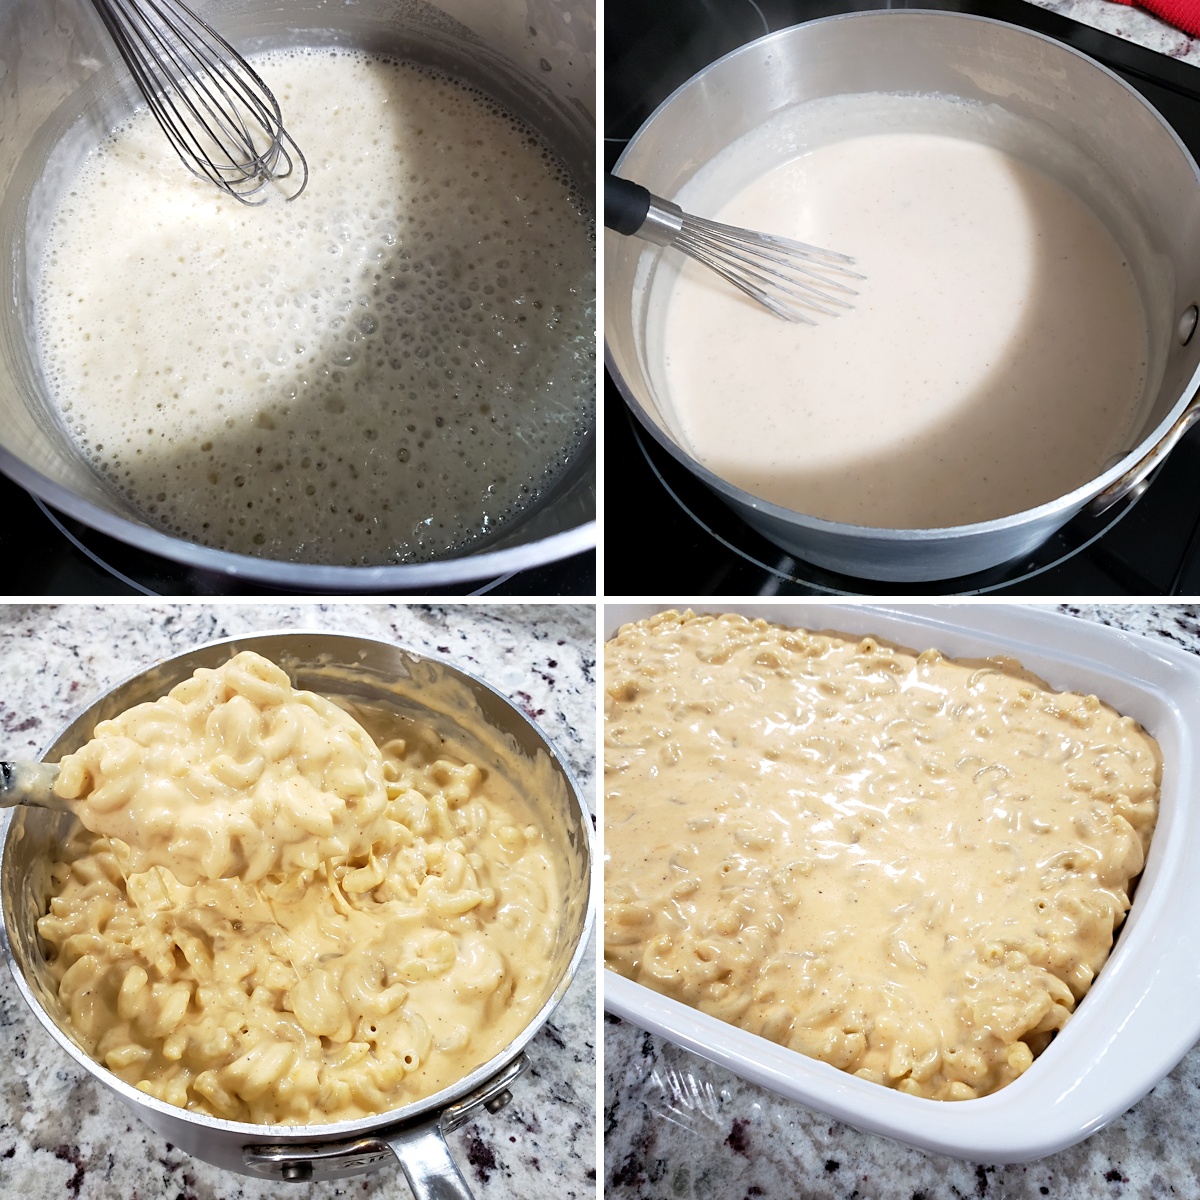 Making a cheese sauce, pouring over macaroni, and adding to a casserole dish.